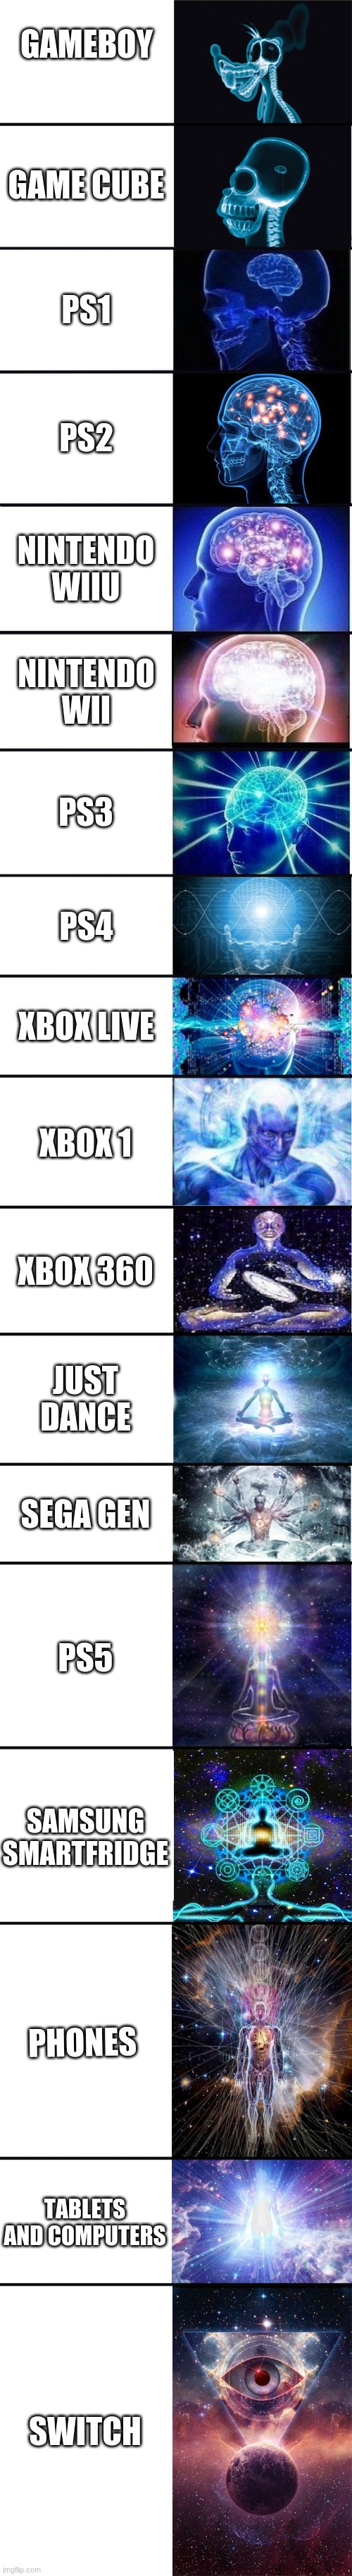 expanding brain: 9001 | GAMEBOY; GAME CUBE; PS1; PS2; NINTENDO WIIU; NINTENDO WII; PS3; PS4; XBOX LIVE; XBOX 1; XBOX 360; JUST DANCE; SEGA GEN; PS5; SAMSUNG SMARTFRIDGE; PHONES; TABLETS AND COMPUTERS; SWITCH | image tagged in expanding brain 9001 | made w/ Imgflip meme maker